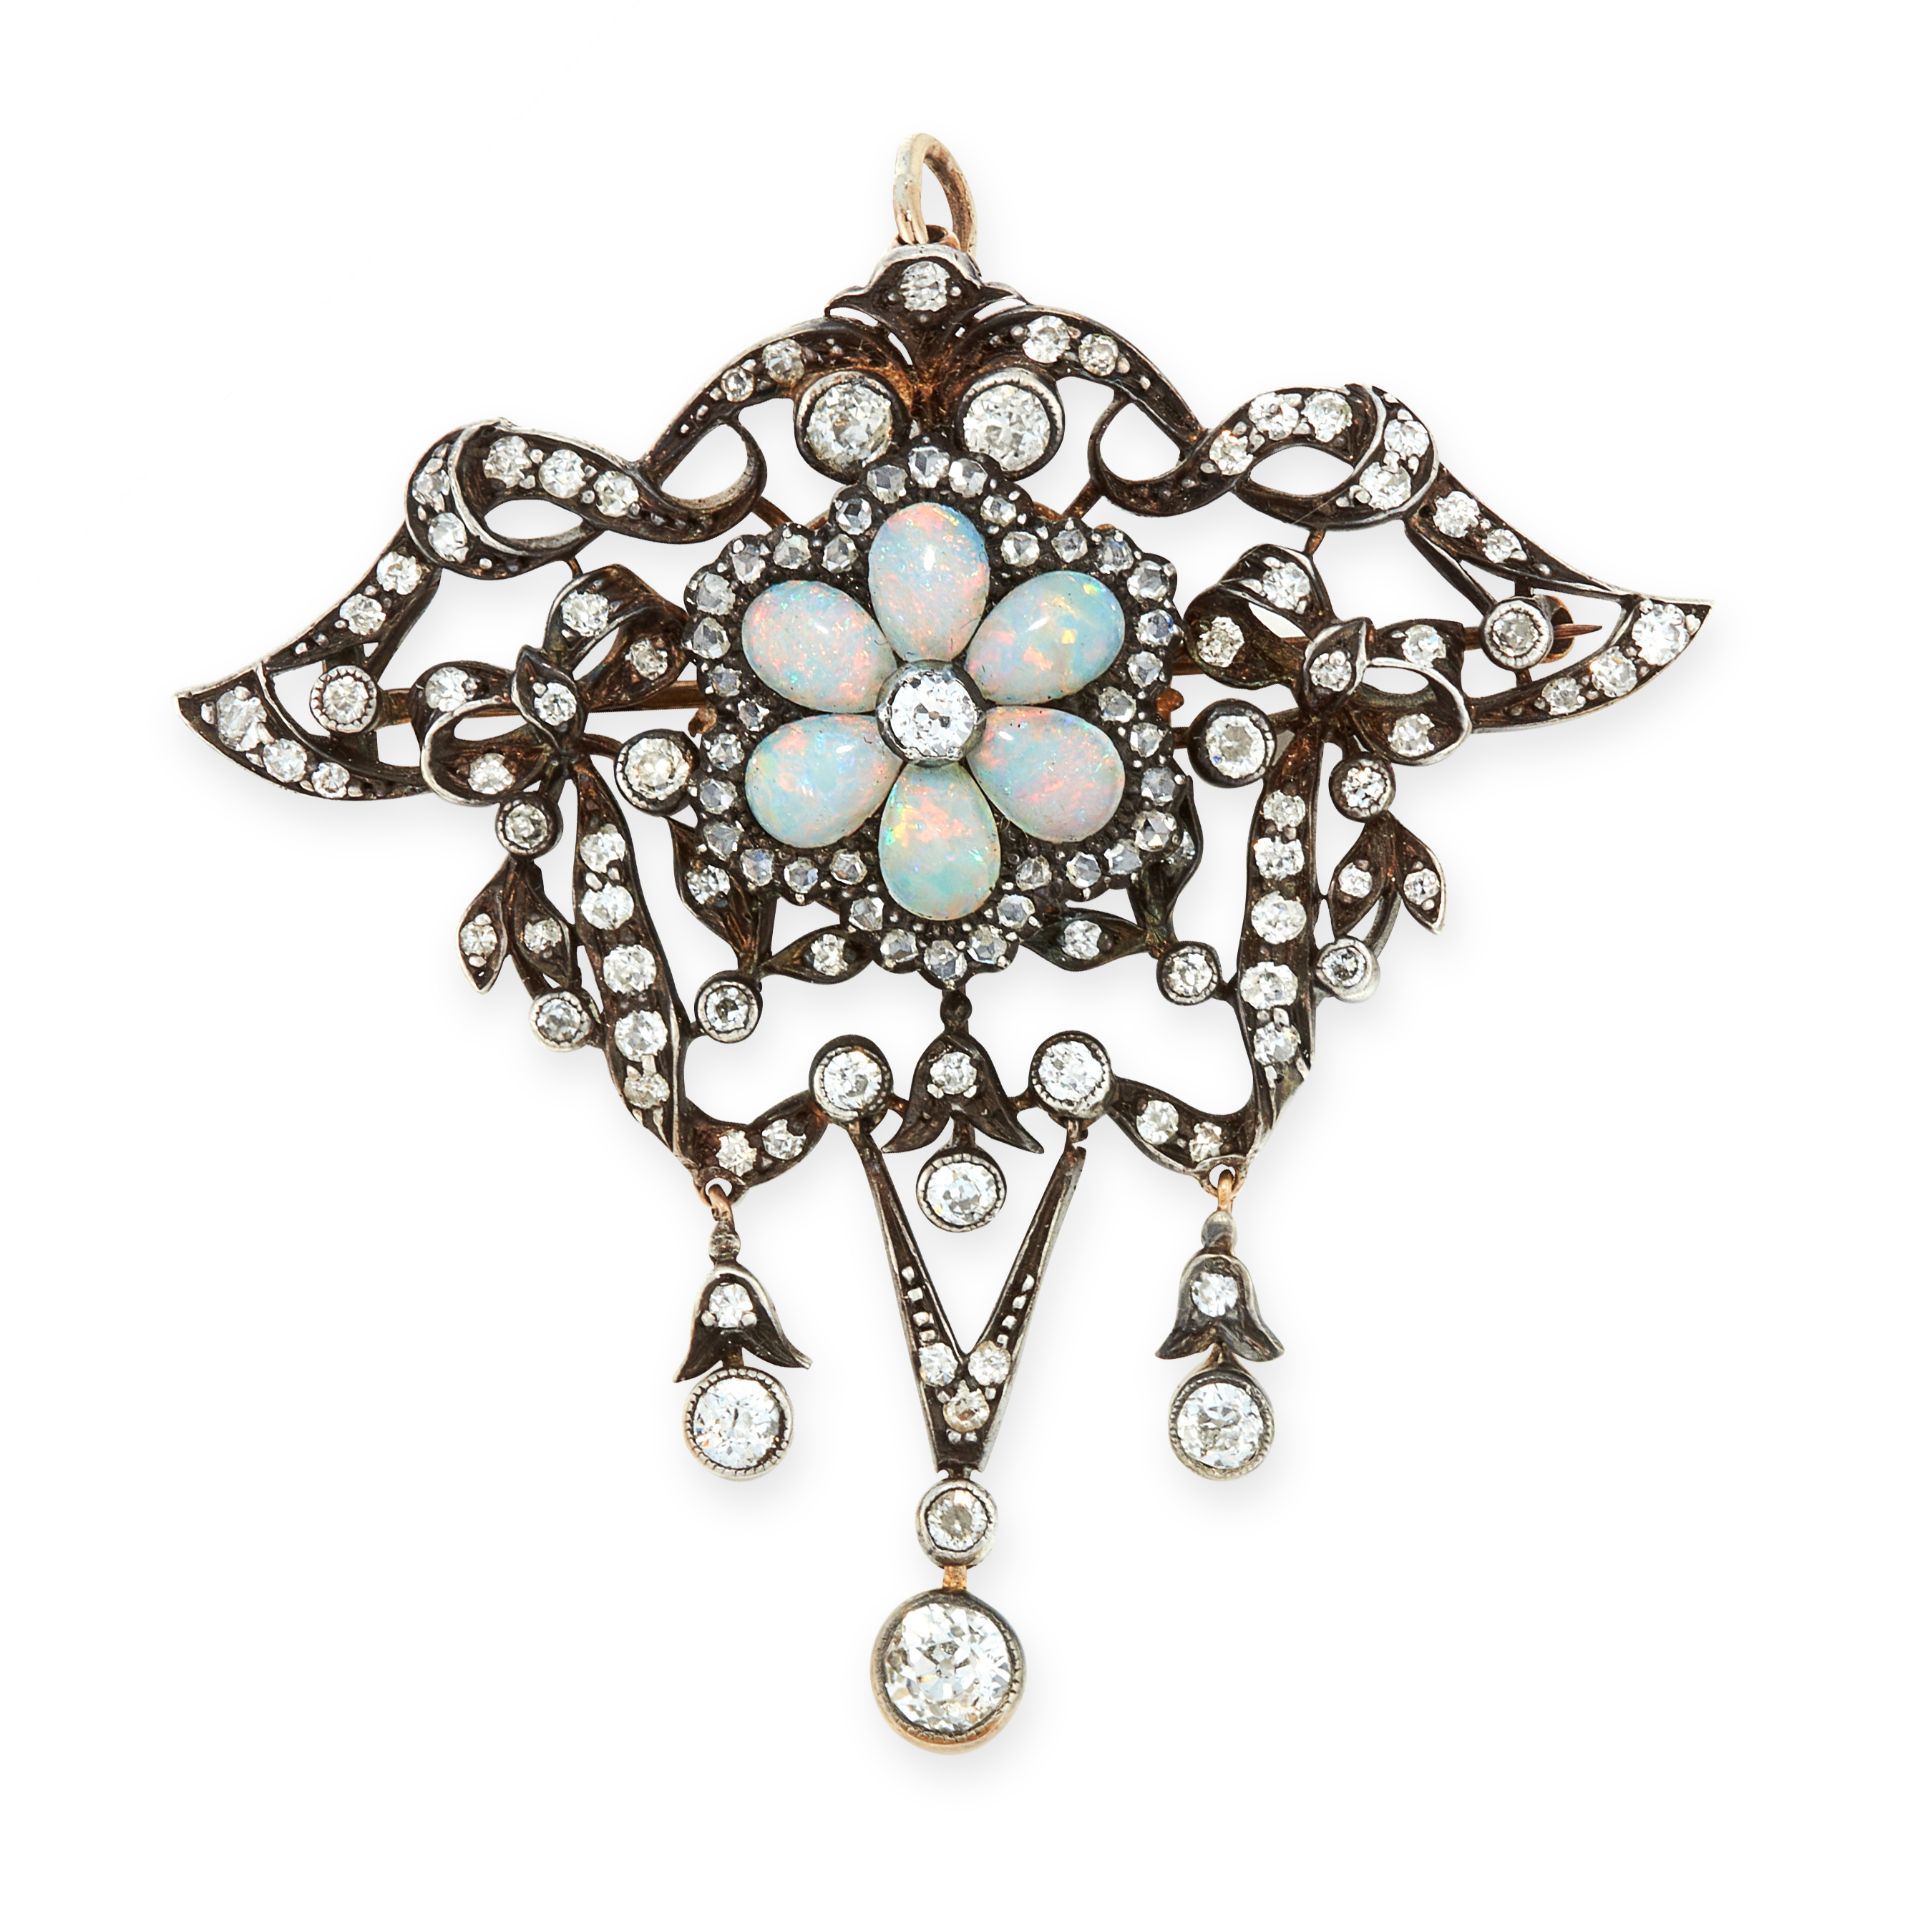 AN ANTIQUE OPAL AND DIAMOND BROOCH / PENDANT, 19TH CENTURY in yellow gol and silver, set with six